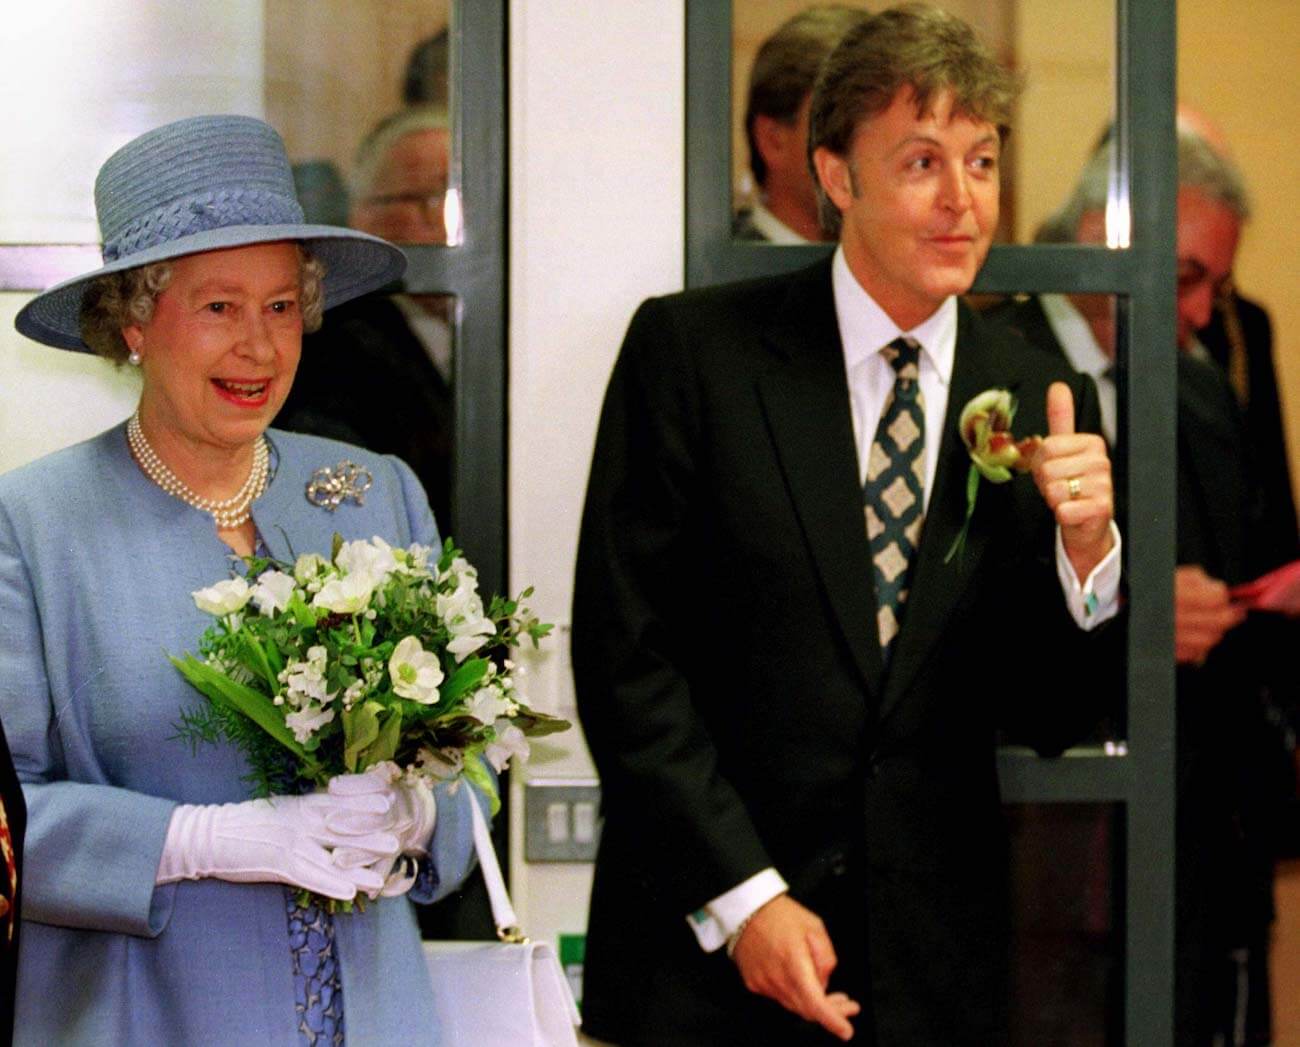 Paul McCartney and Queen Elizabeth II at the Liverpool Institute for Performing Arts.